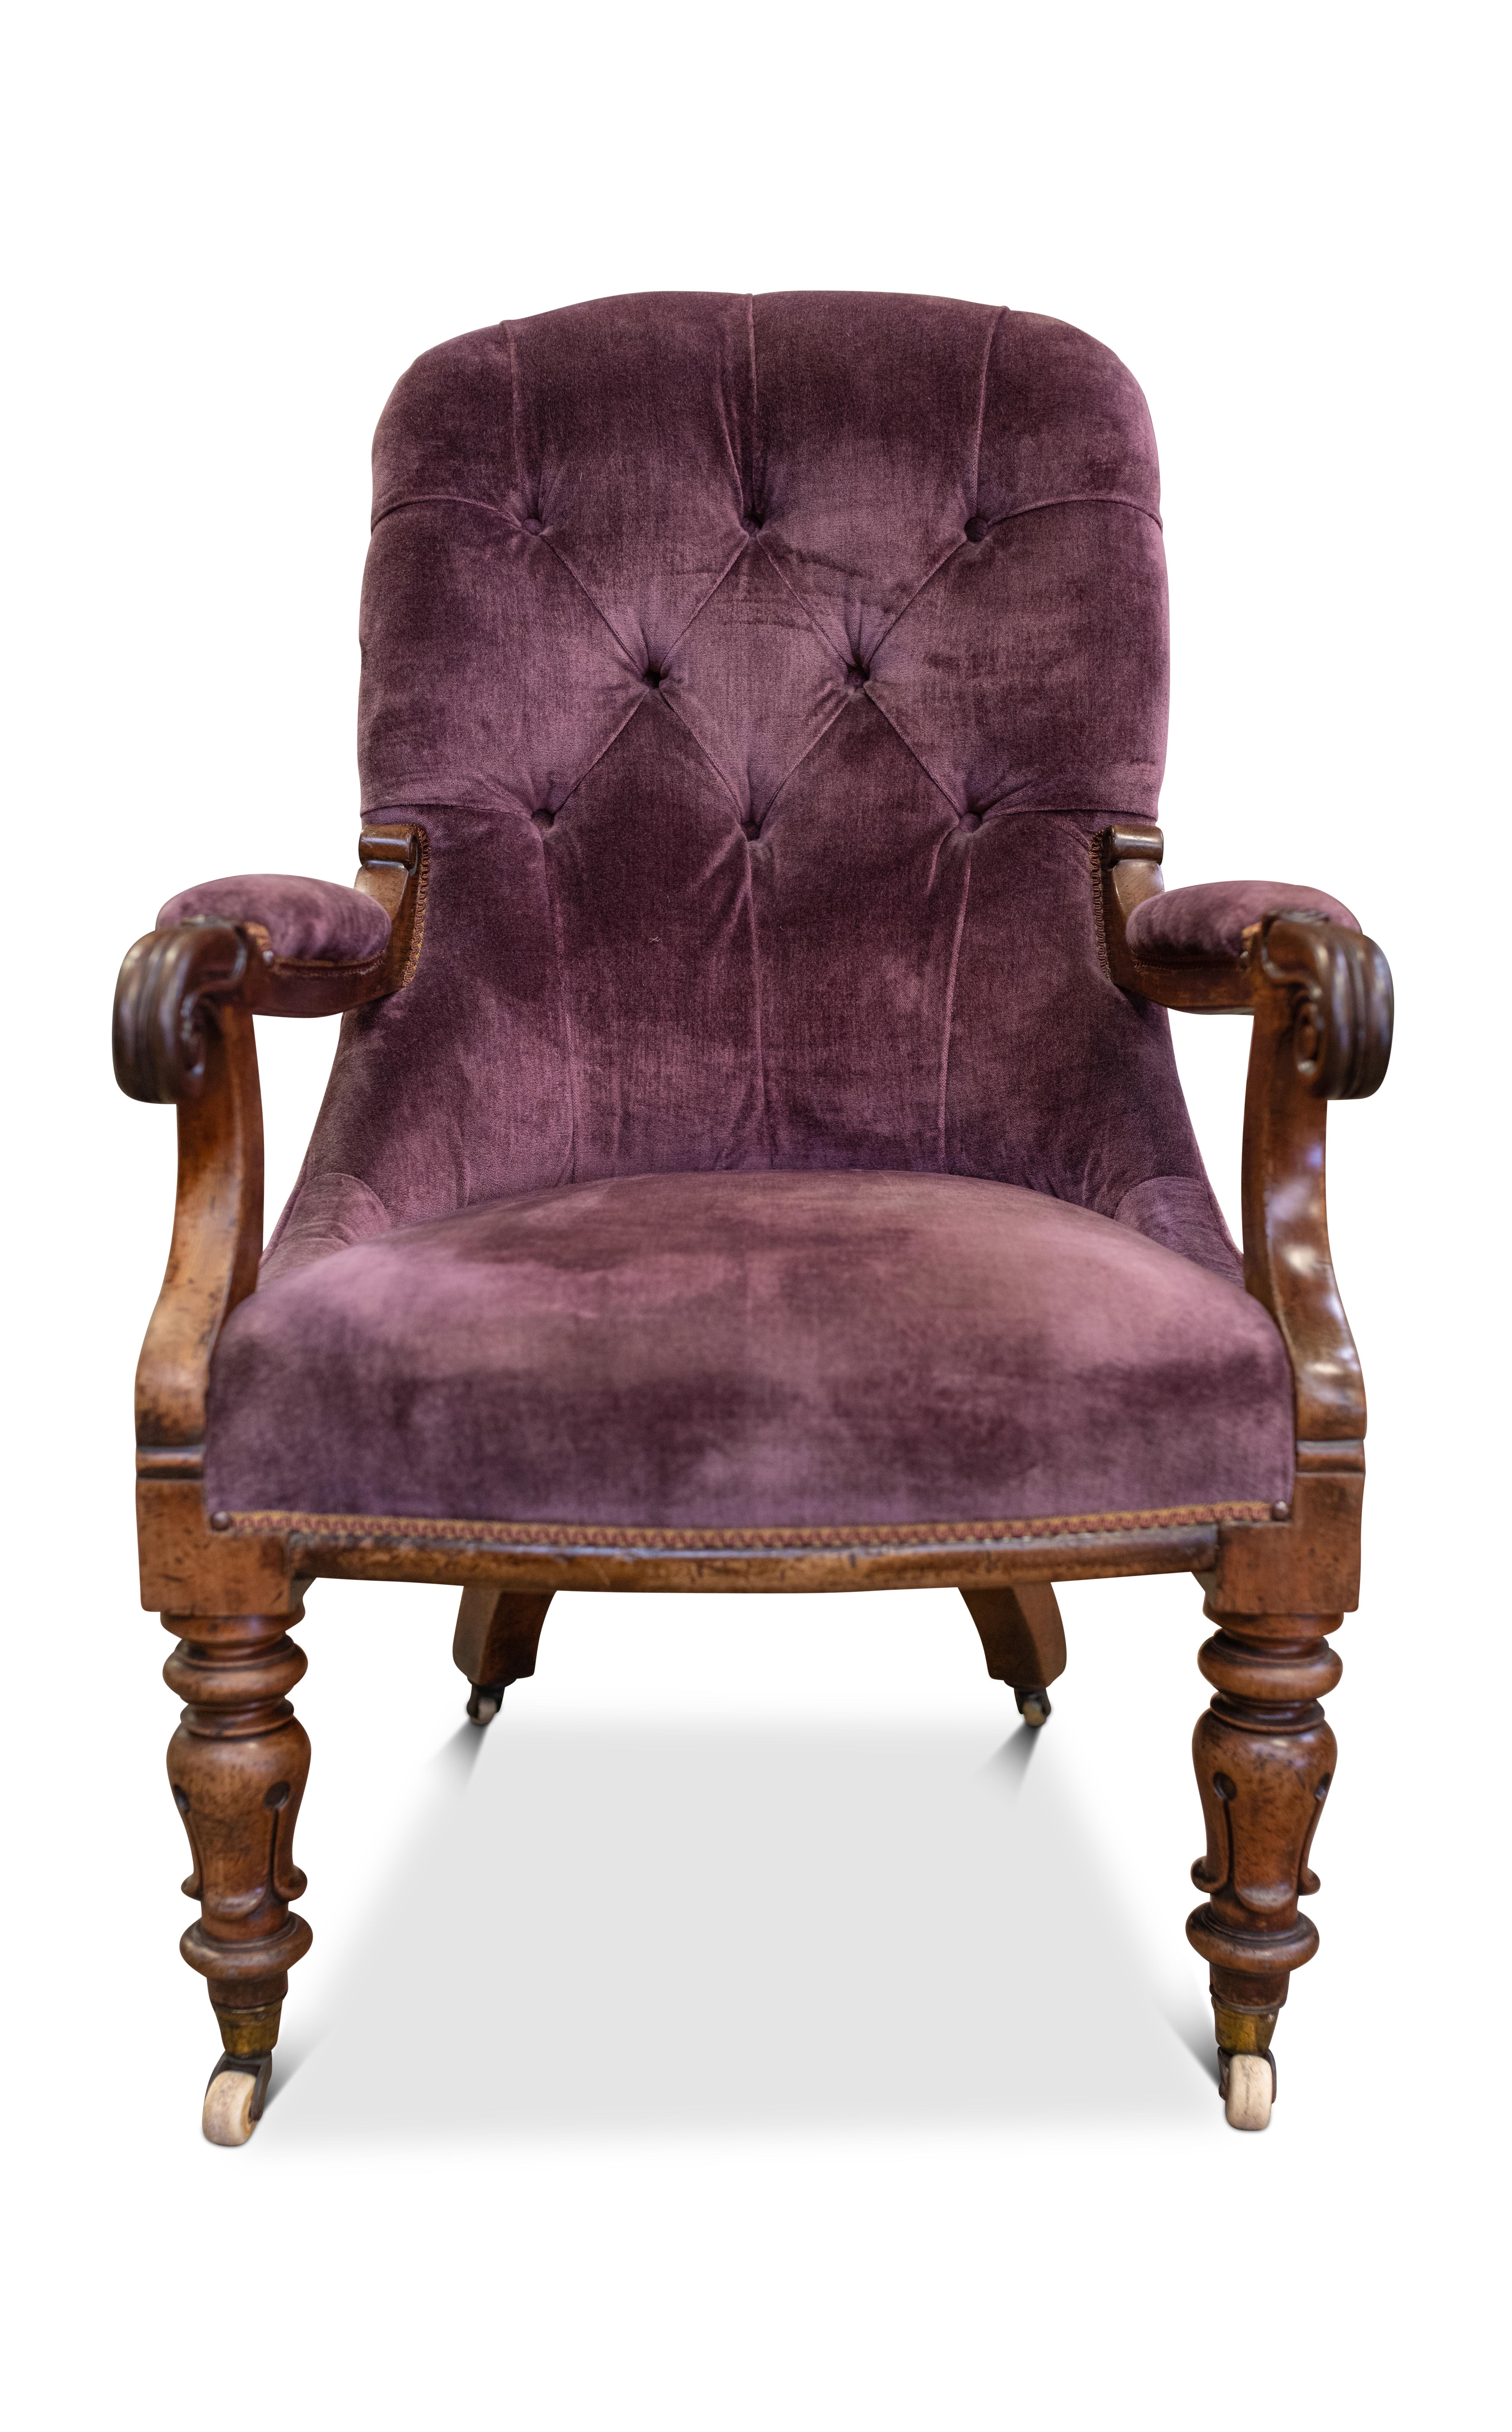 William IV Scroll Arm Button Back Library Slipper Armchair With Purple Velvet Button Back Upholstery upon Porcelain & Brass Castors In The Manner of Gillows

Extra dimensions
Depth of seat 50cm
Width of seat 51cm
Height to arms 63cm
